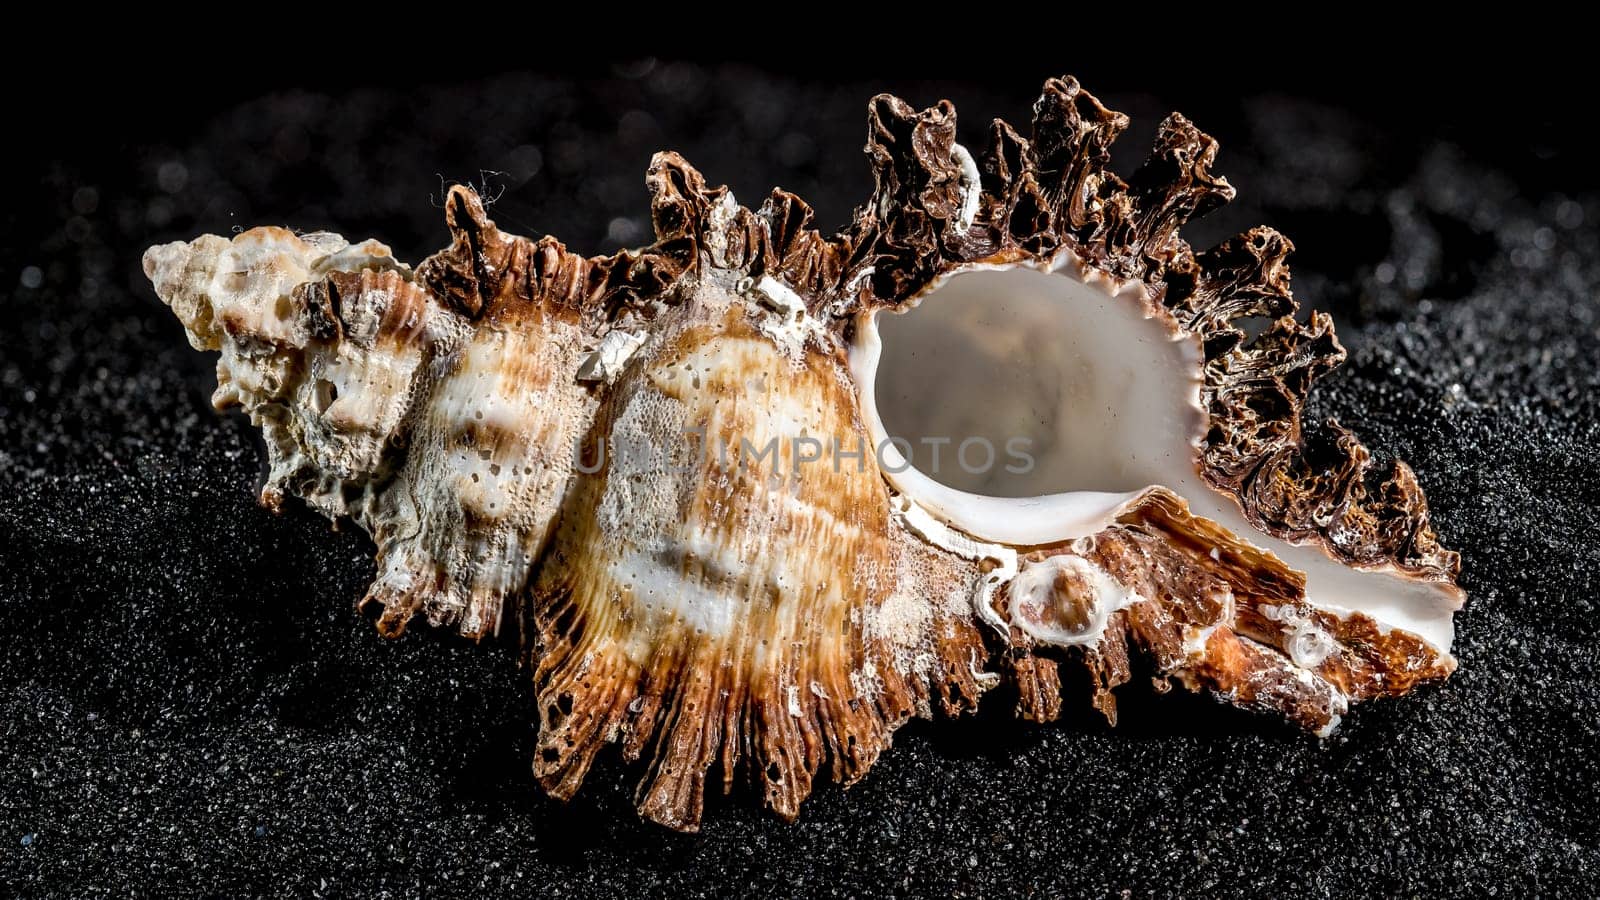 Hexaplex princeps shell on a black sand background by Multipedia